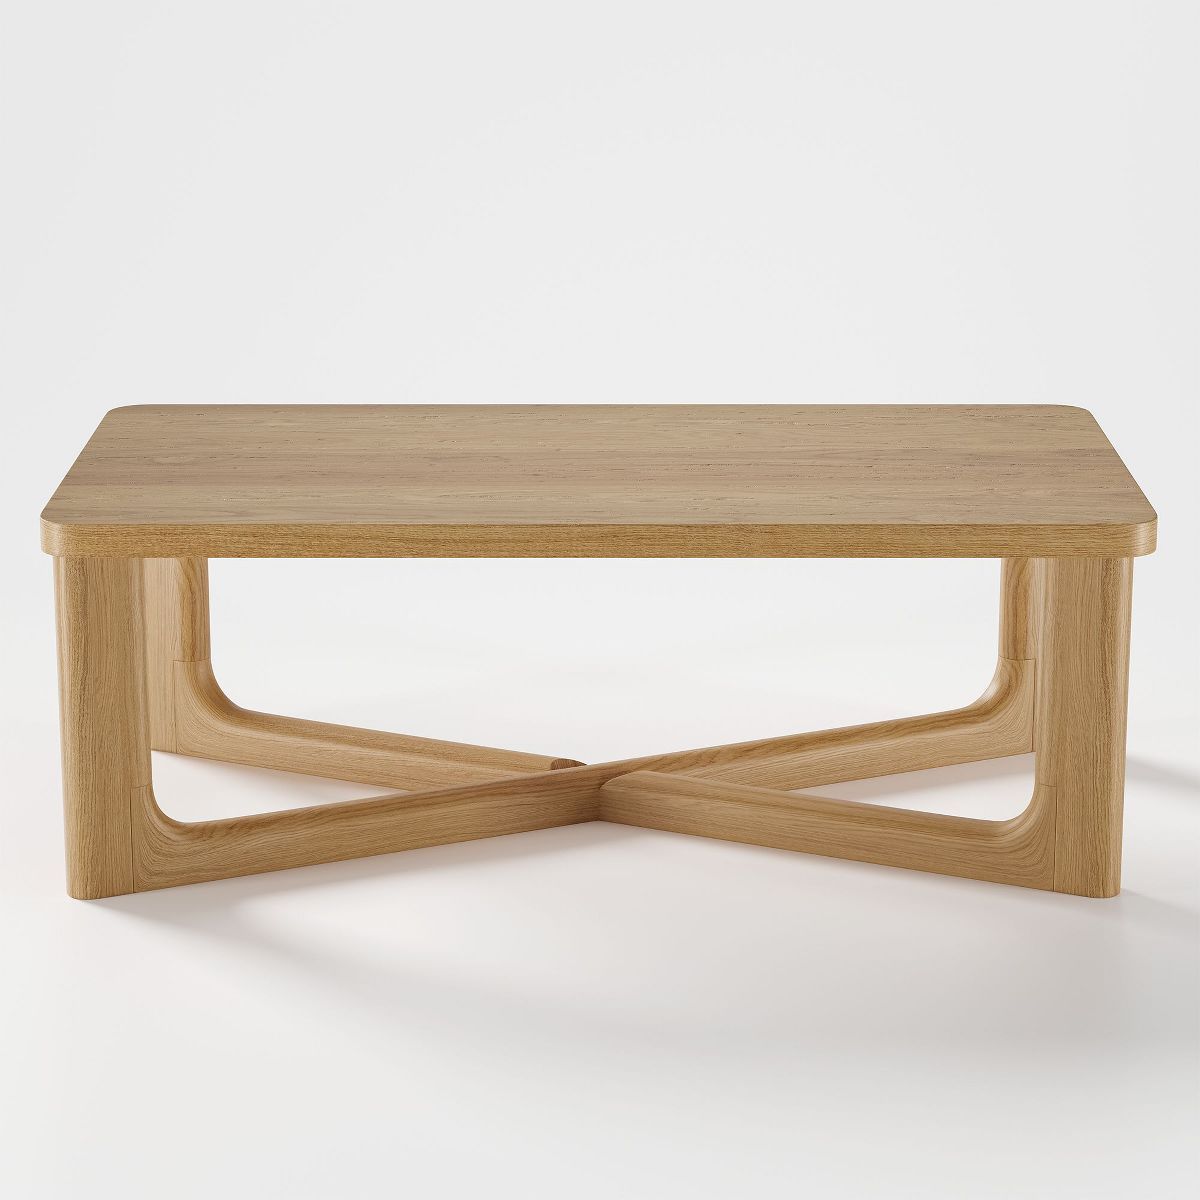 Neutypechic Wood Grain Tabletop Rectangle Coffee Table for Living Room | Target